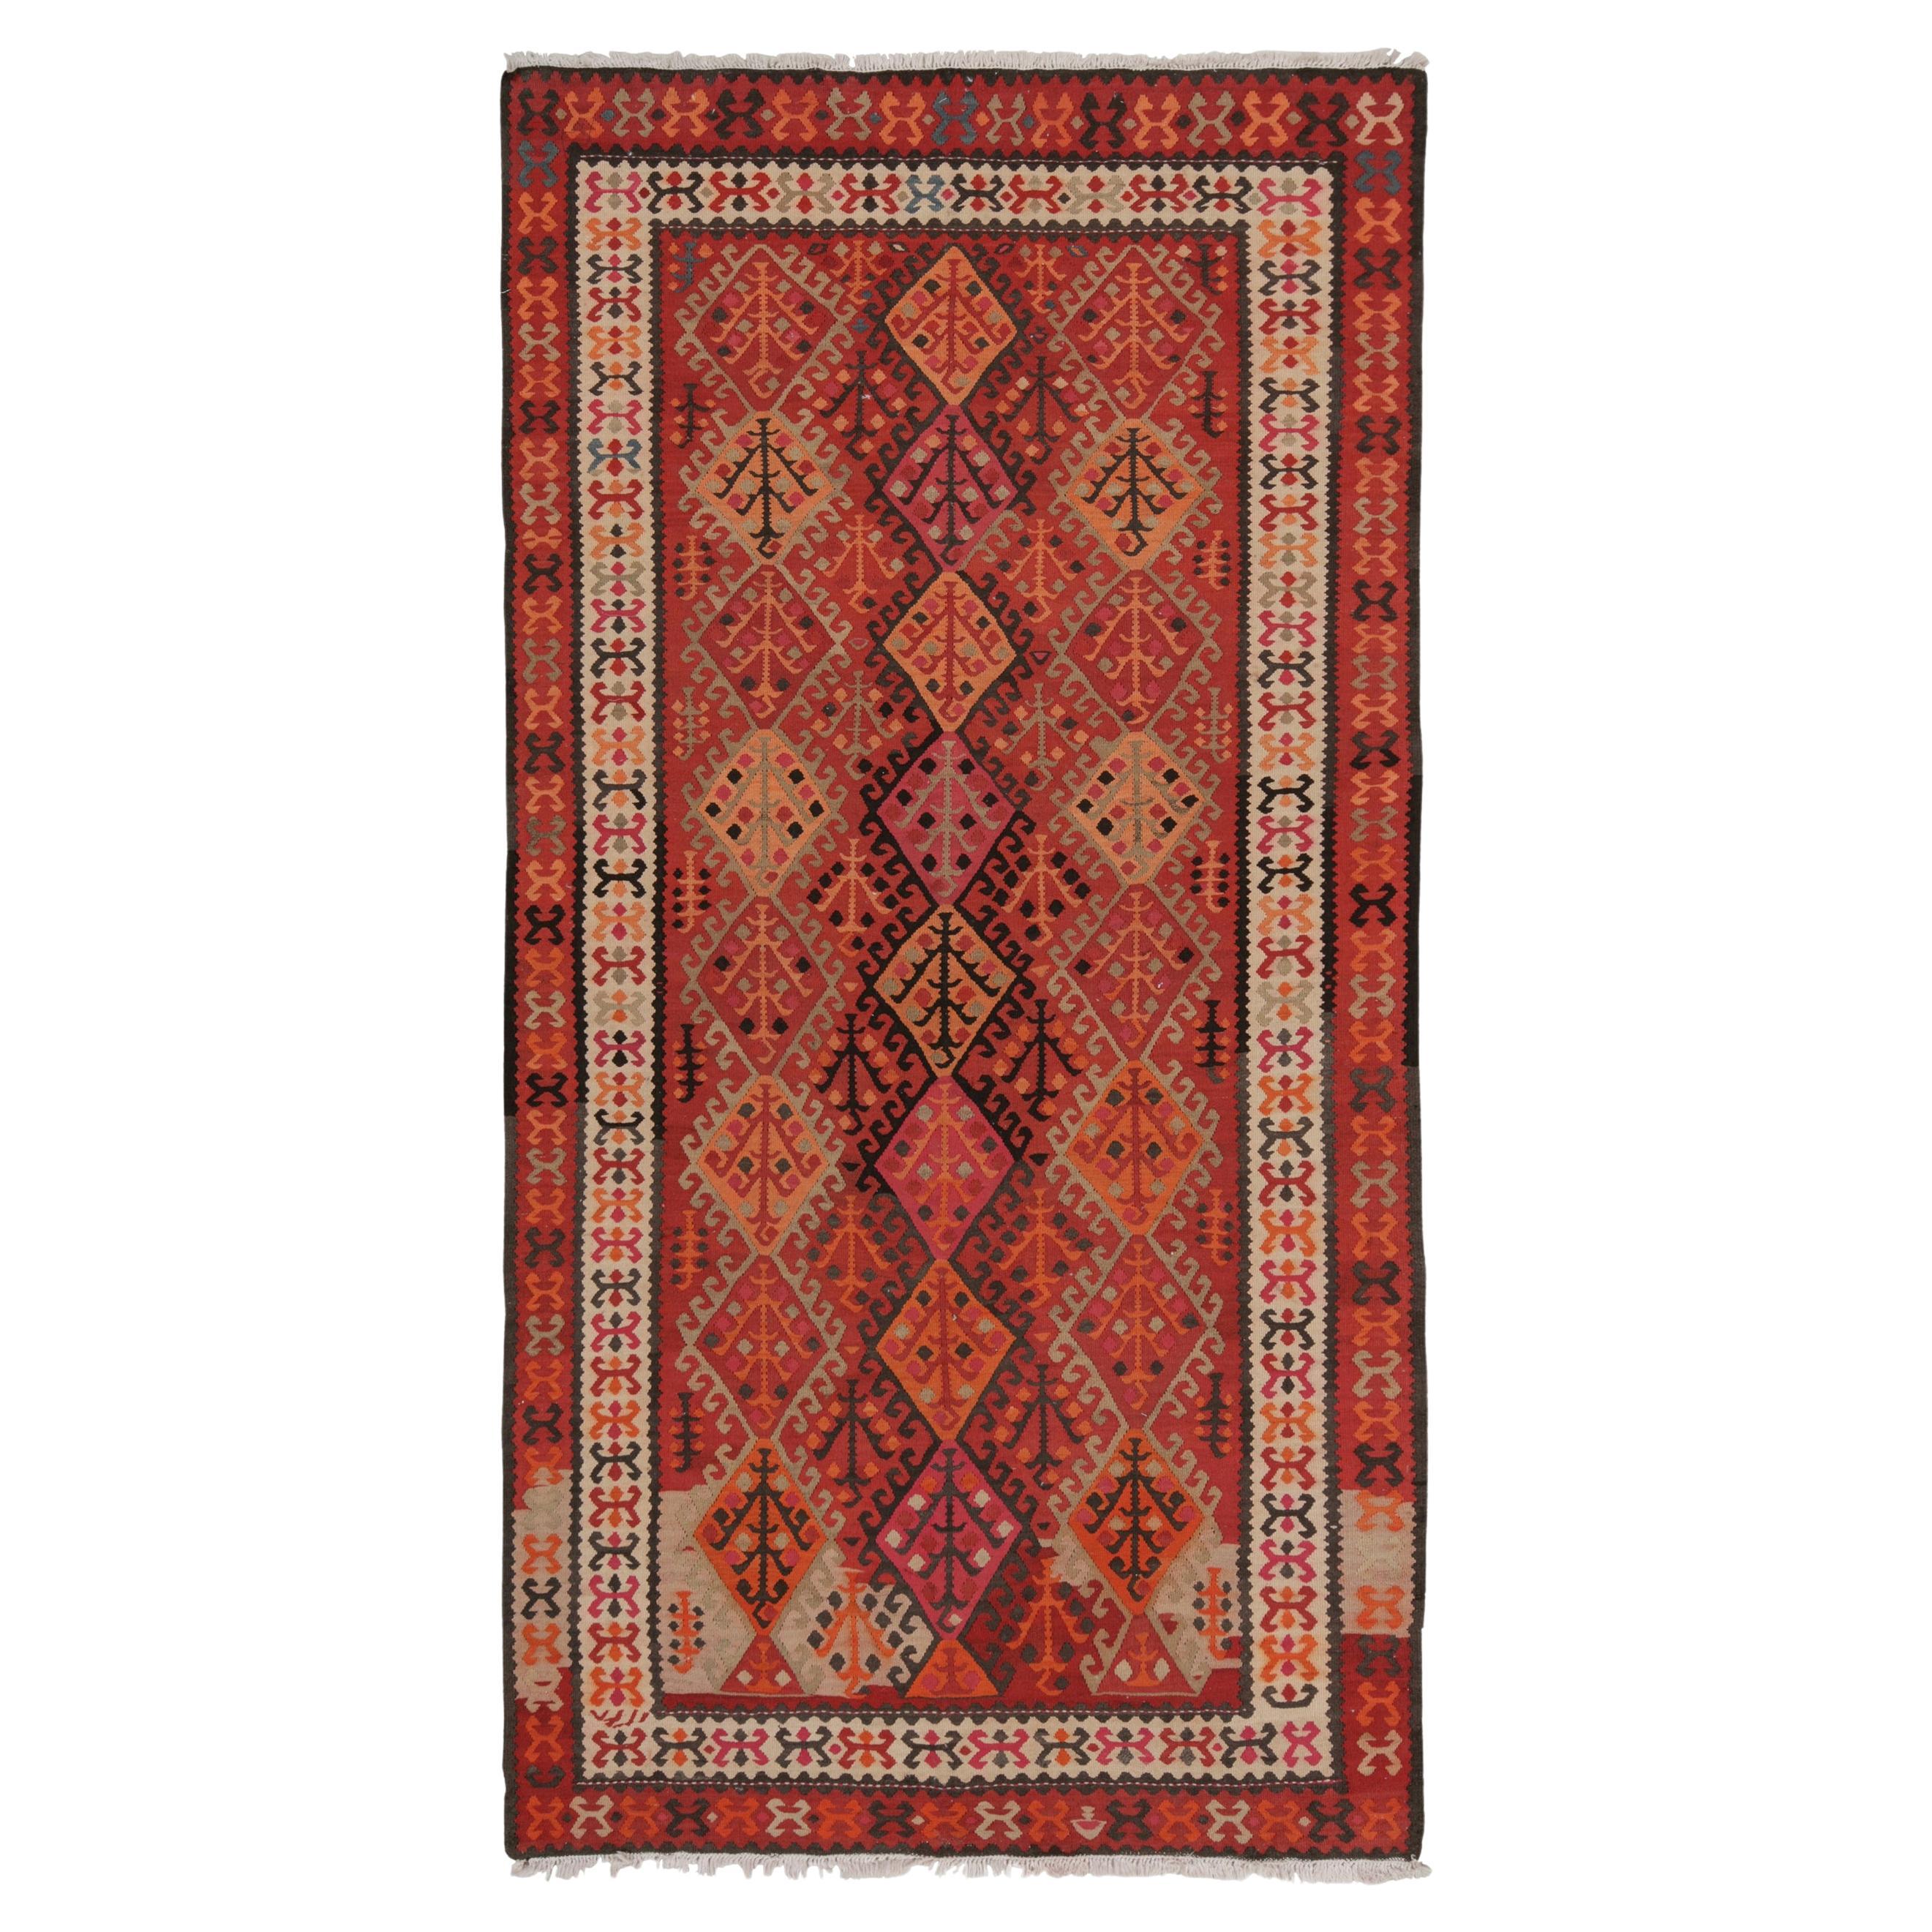 Vintage Tribal Kilim Rug in Red with Colorful Geometric Patterns by Rug & Kilim For Sale